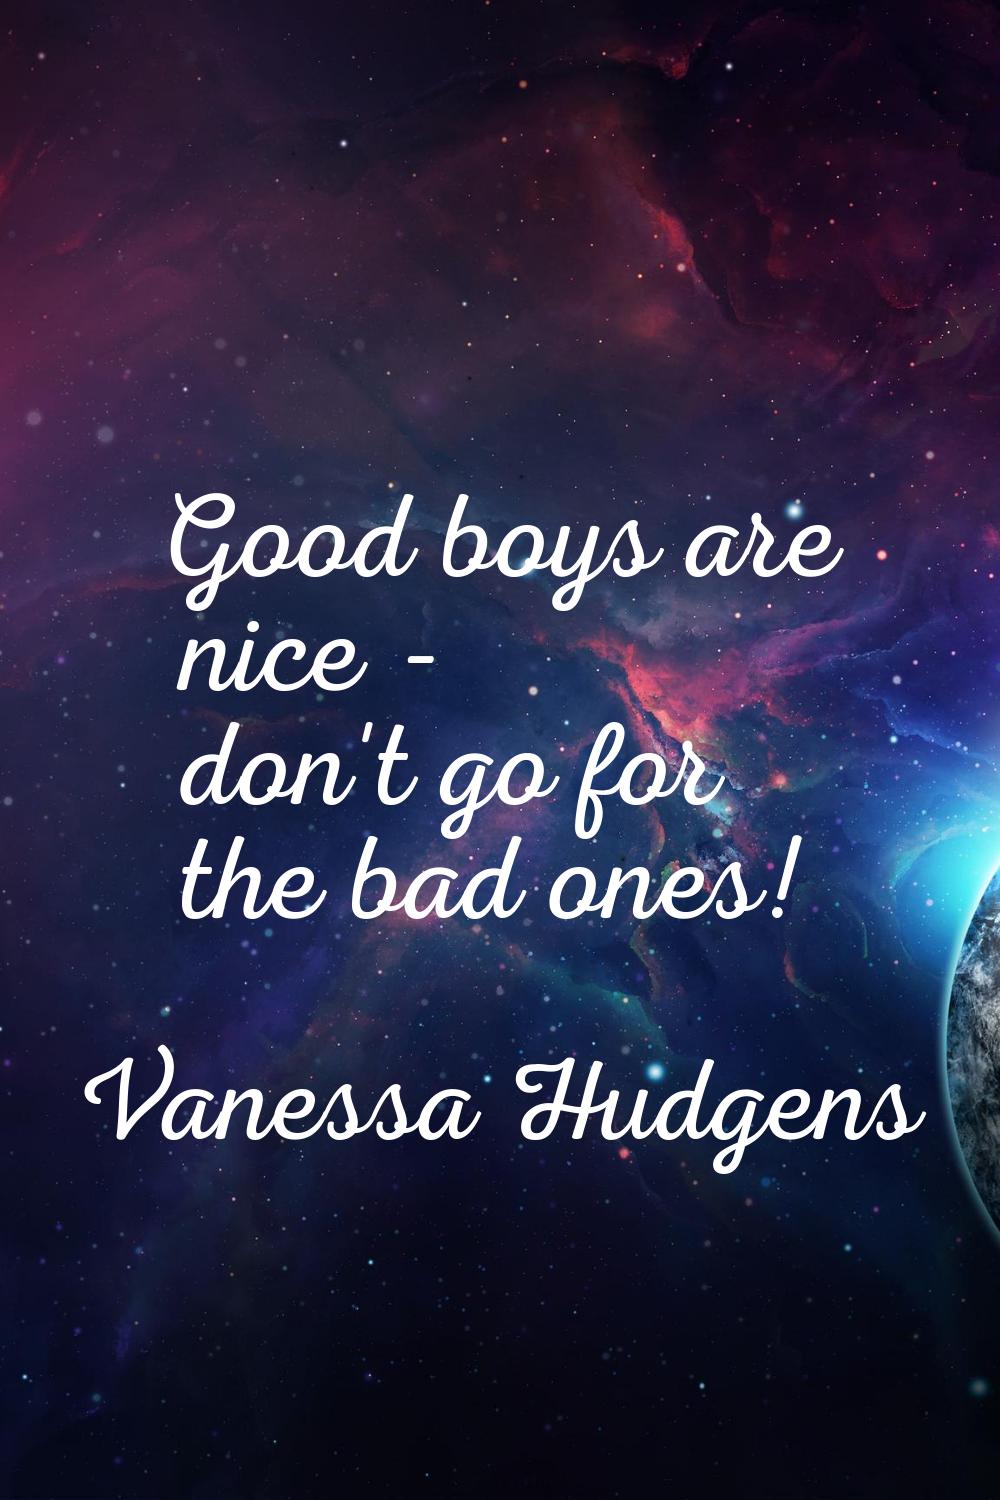 Good boys are nice - don't go for the bad ones!